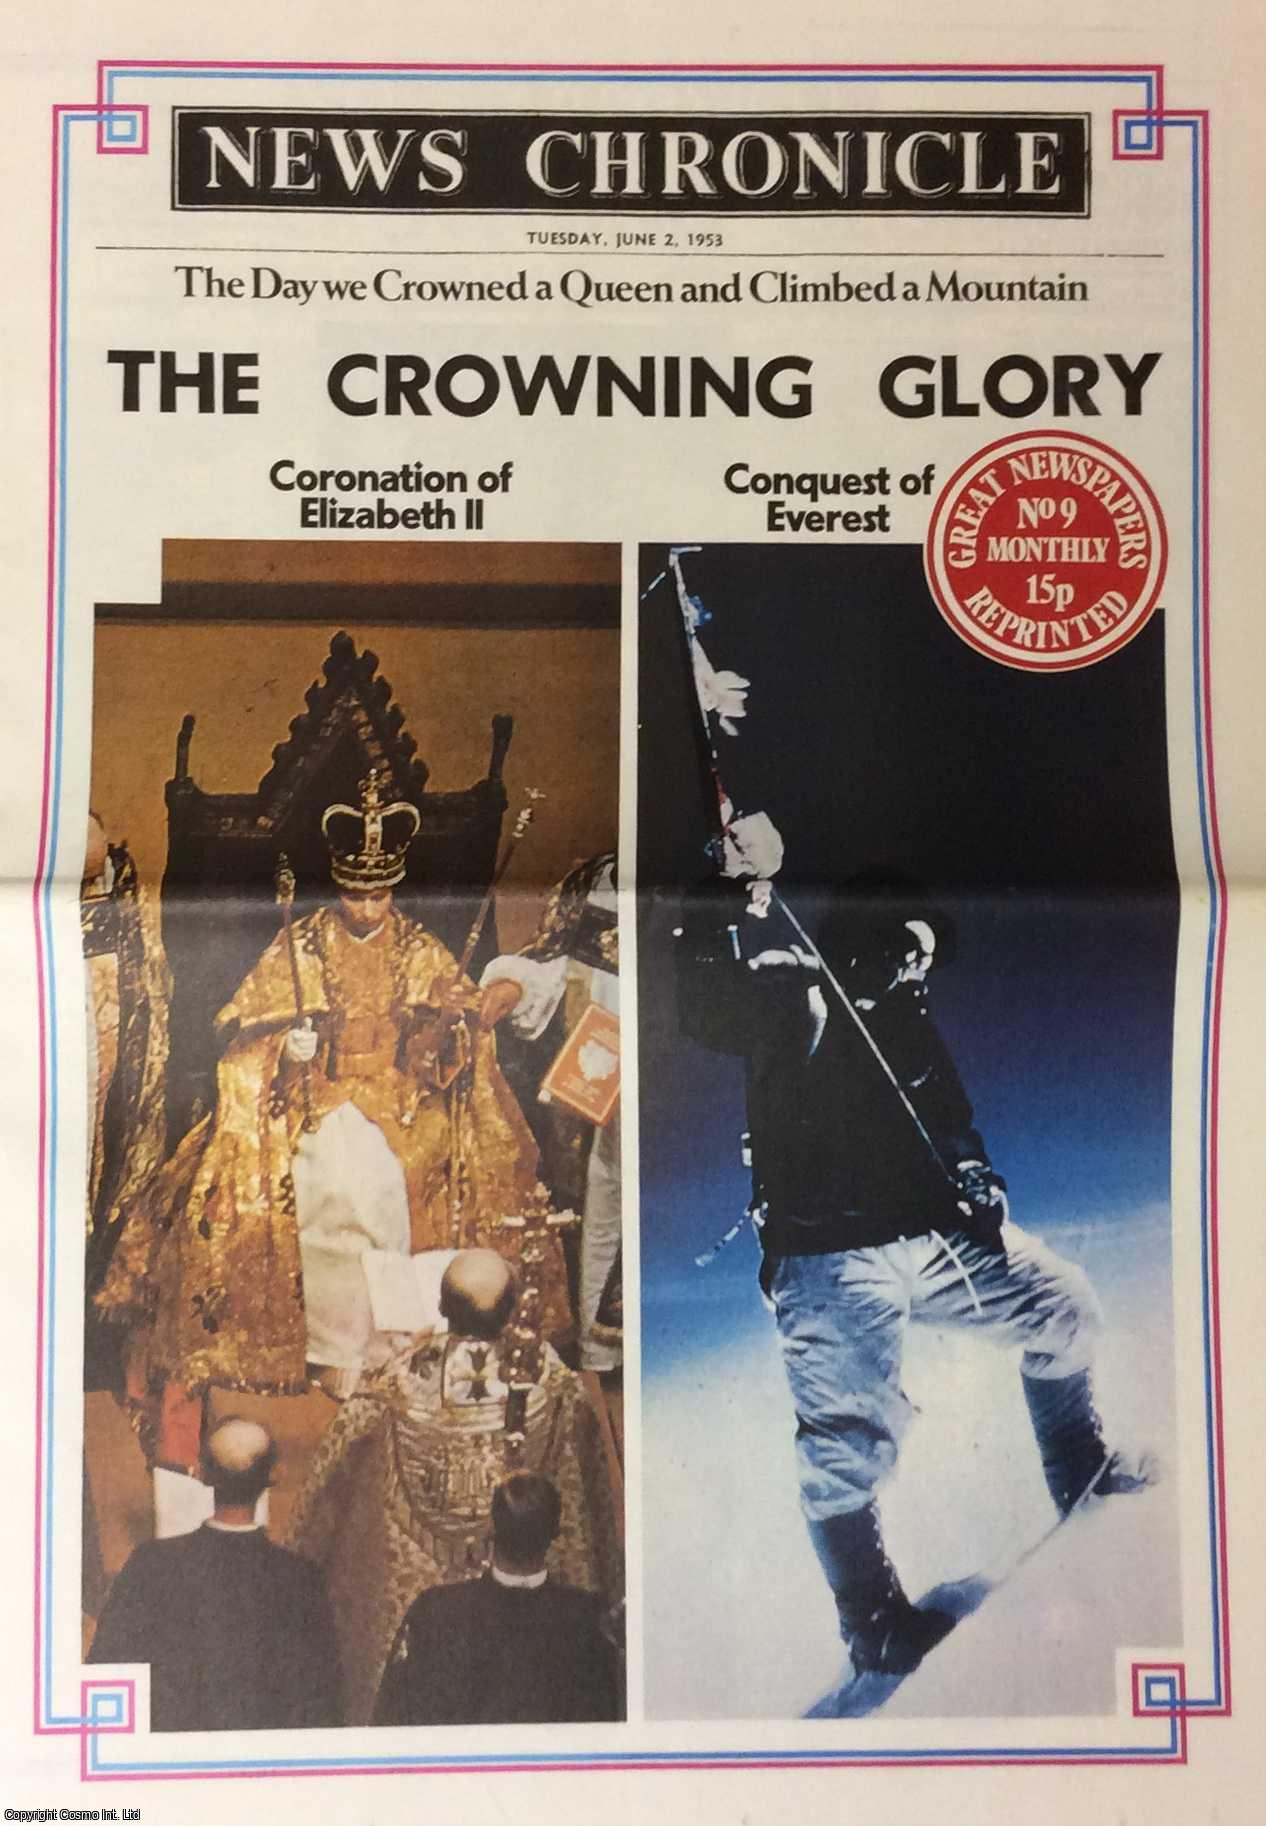 --- - The Crowning Glory. The Day we Crowned a Queen and Climbed a Mountain. News Chronicle. Tuesday, June 2nd, 1953. Great Newspapers Reprinted, Number 9.